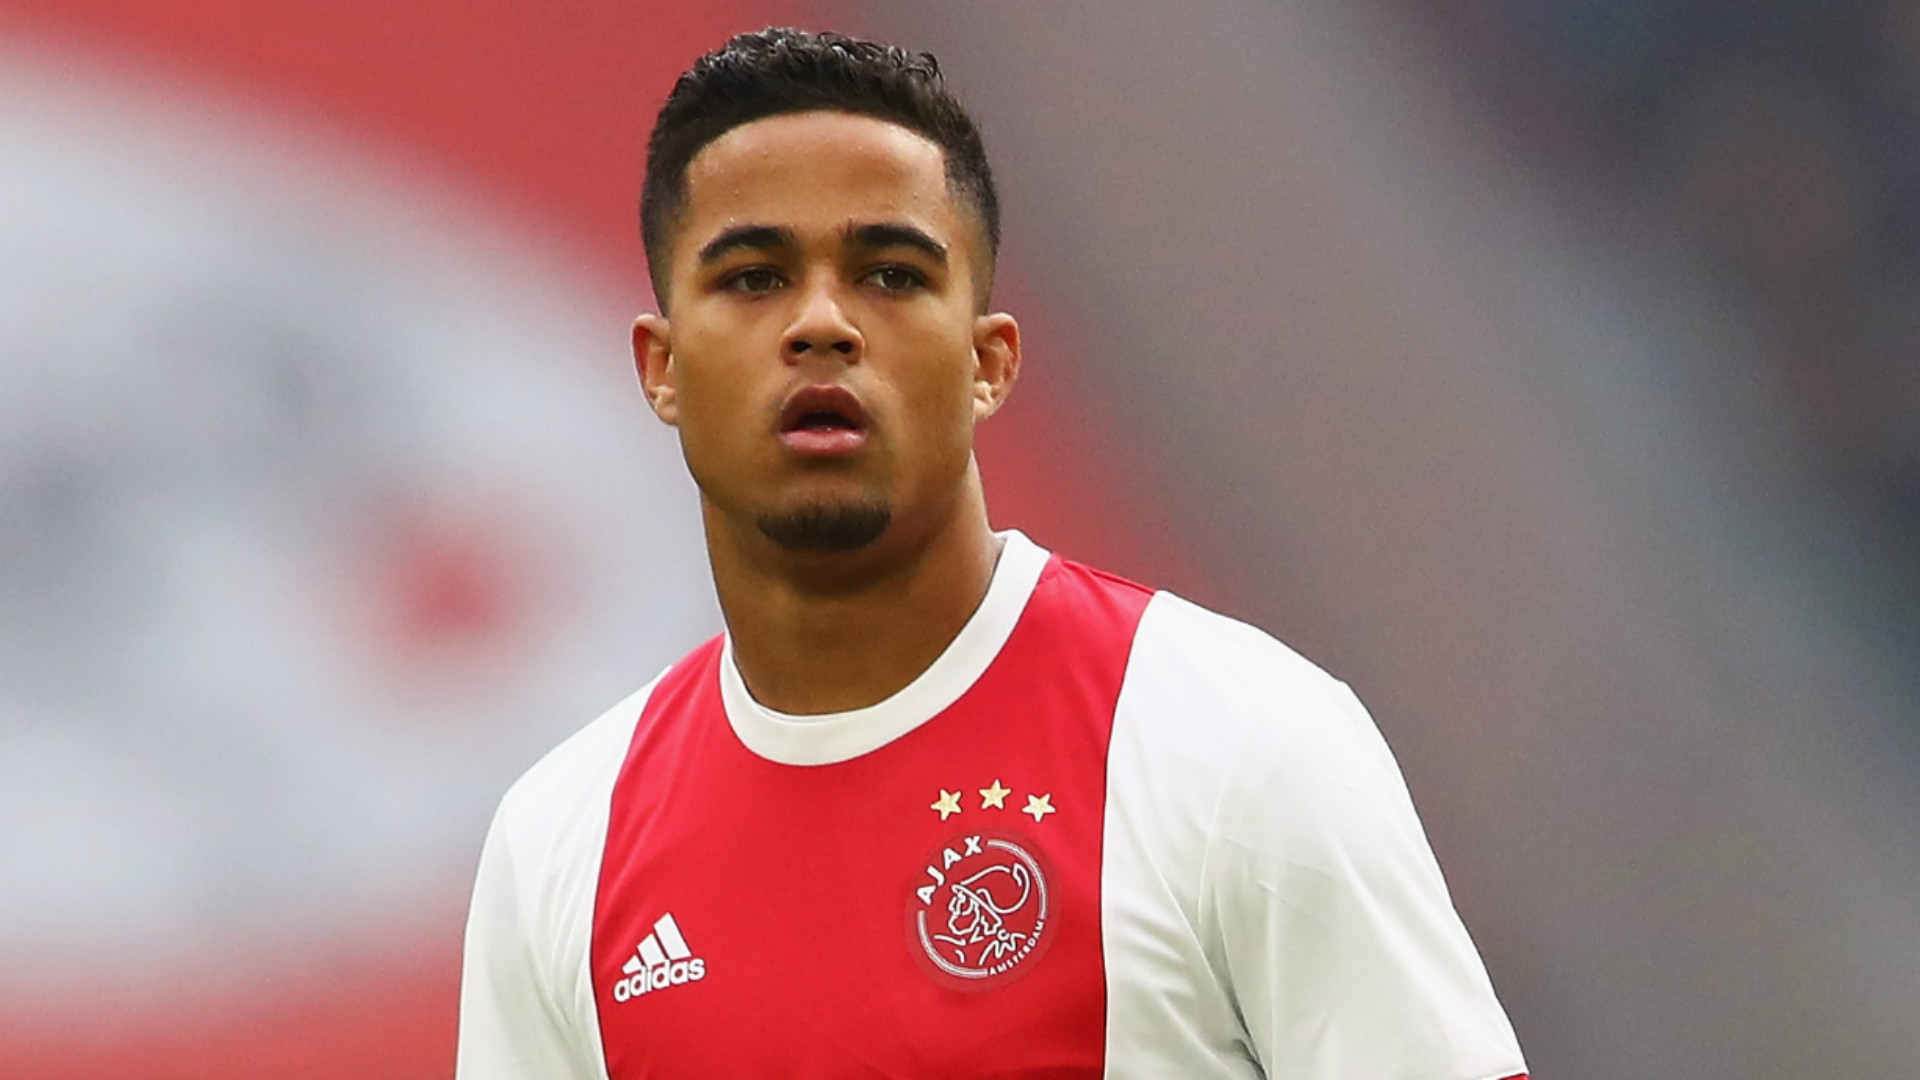 Justin Kluivert’s move away from Ajax could derail his career